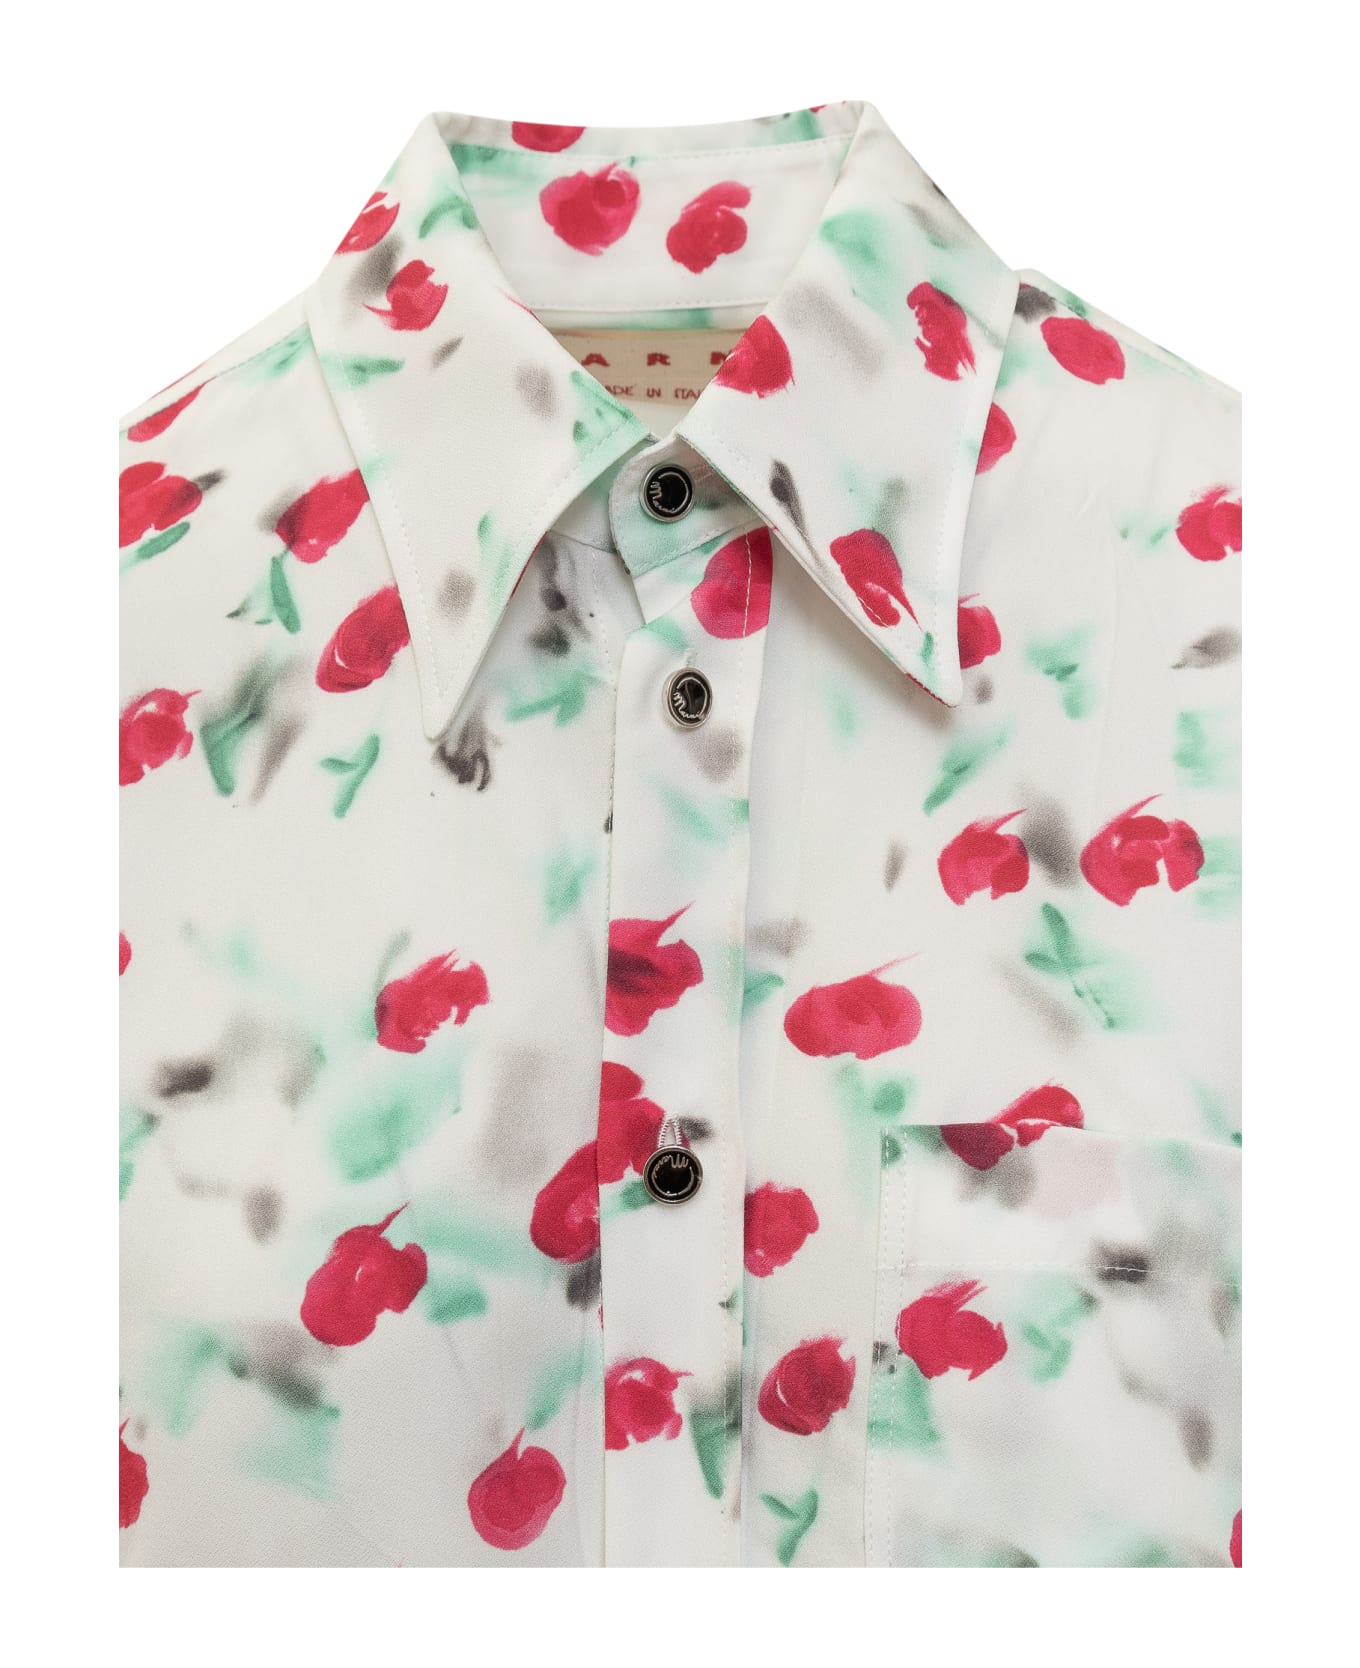 Marni All-over Floral Printed Shirt - LILYWHITE シャツ